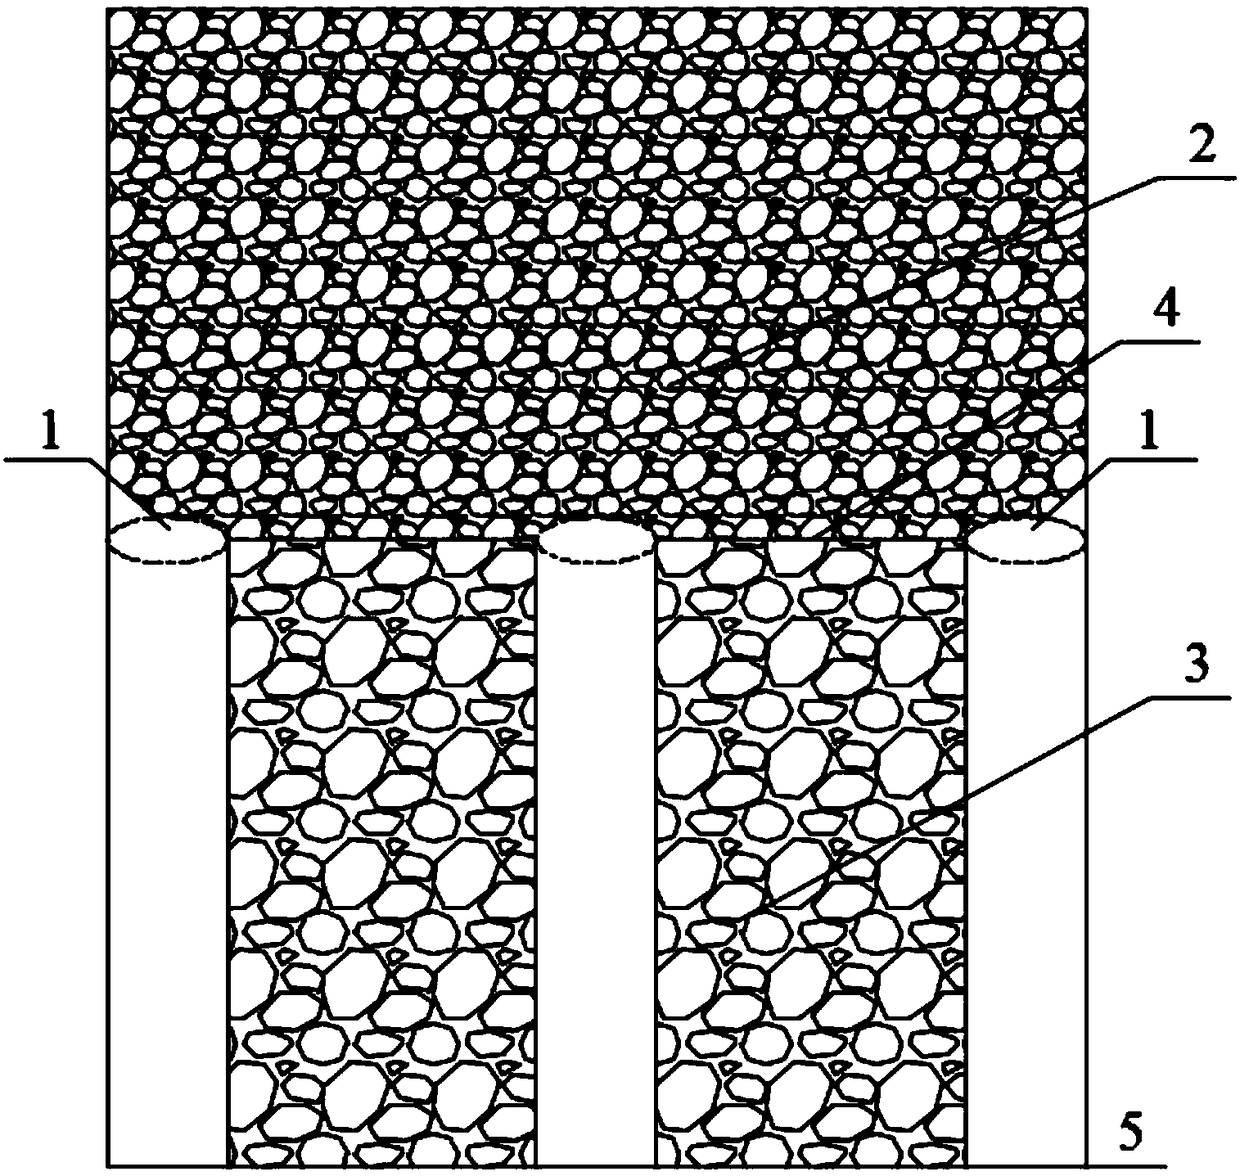 Underground diaphragm wall construction method suitable for pebble and boulder stratums with non-uniform hardness